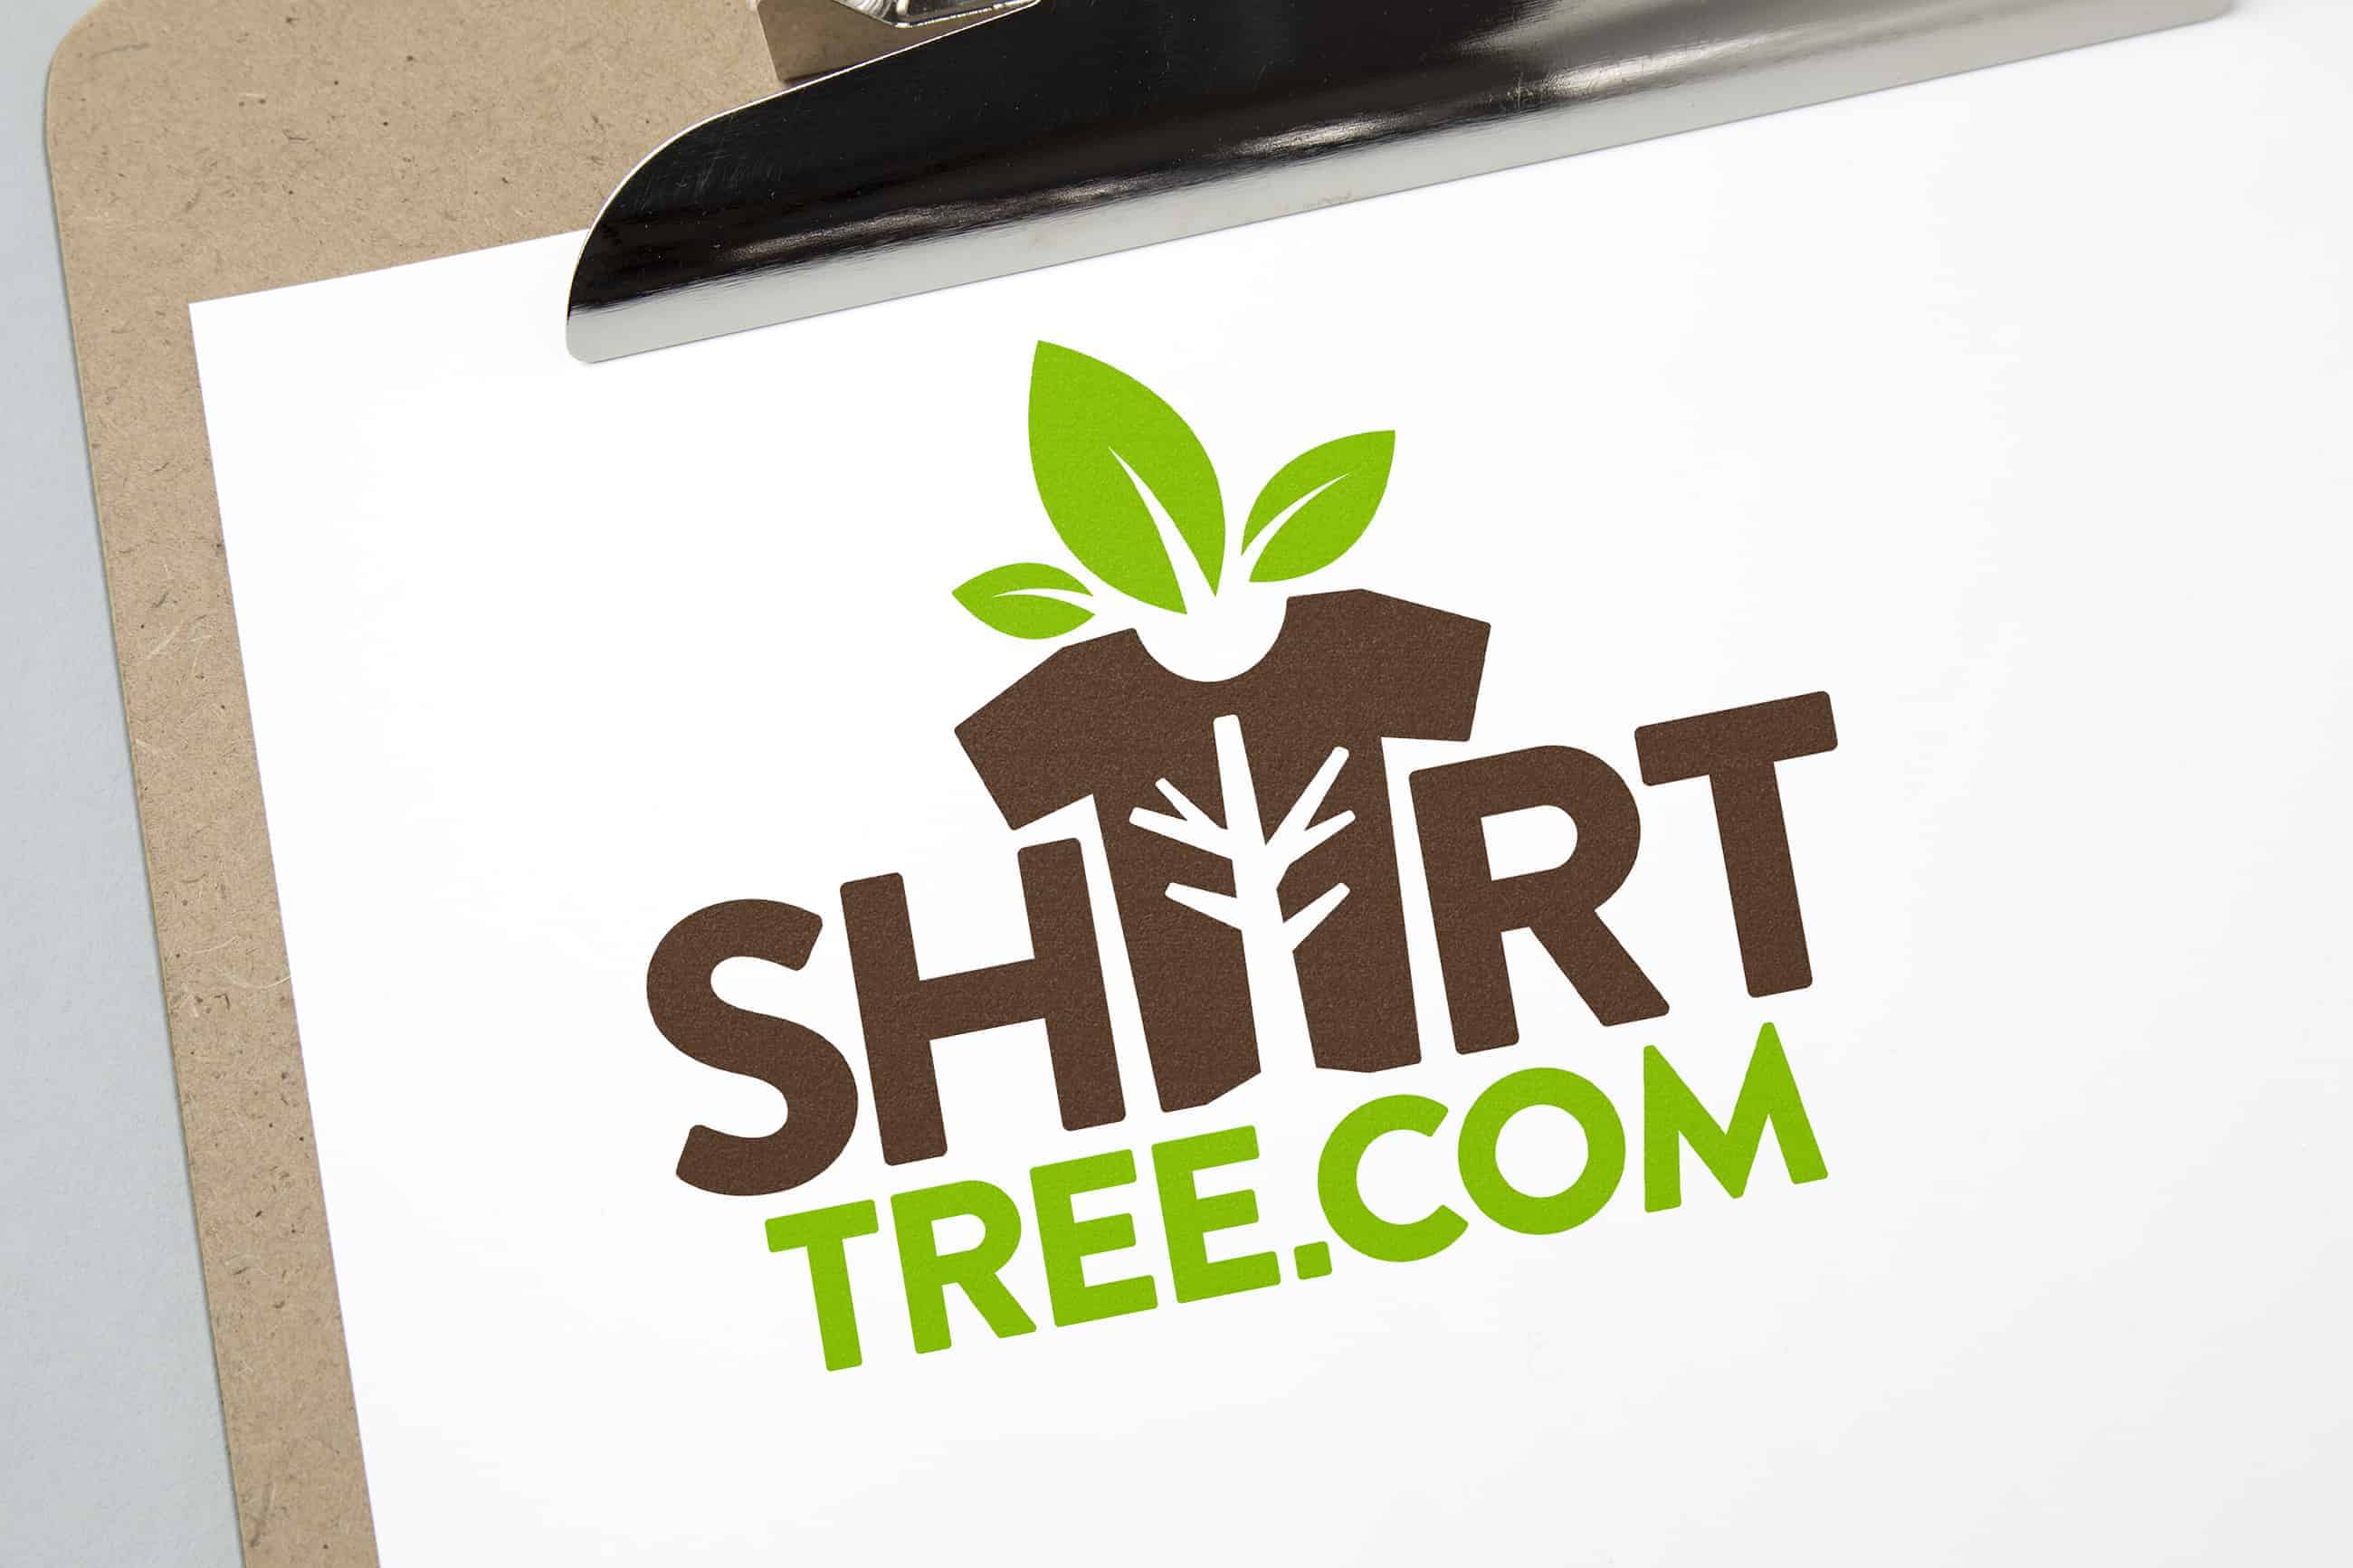 Read more about the article Shirt Tree